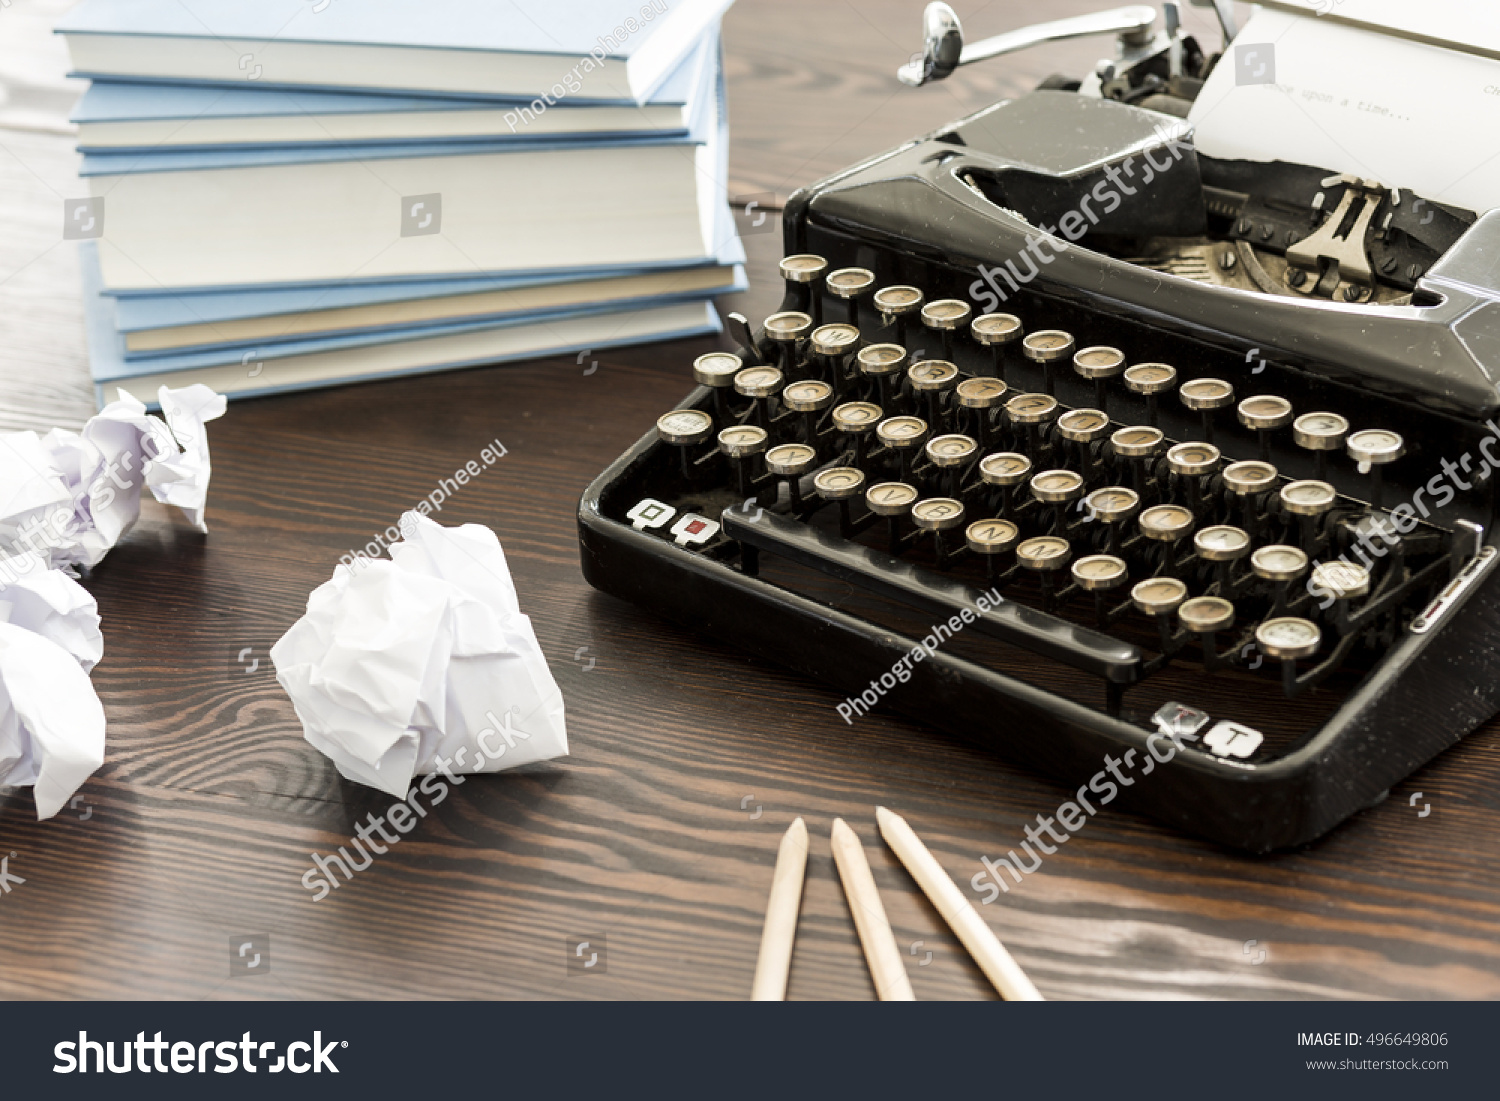 Novelist's desk with the typewriter, books, pencils and creased papers on #496649806